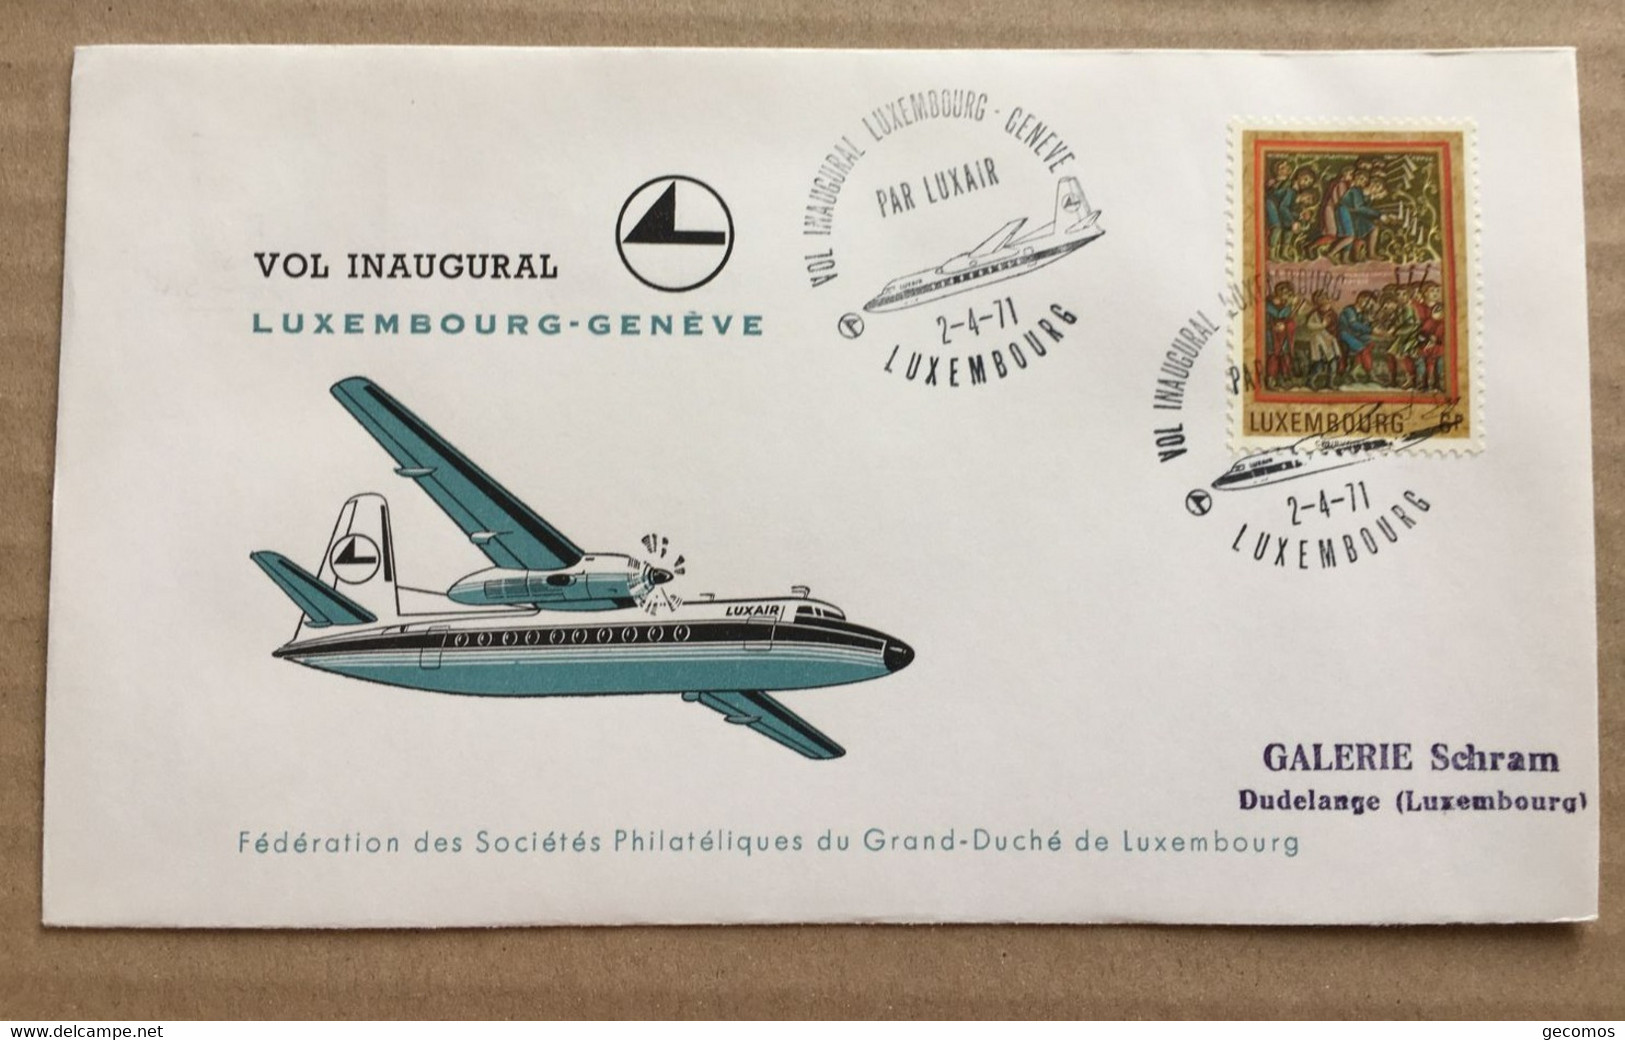 VOL INAUGURAL LUXEMBOURG-GENEVE 2-4-71 - (Avion LUXAIR.) - Lettres & Documents